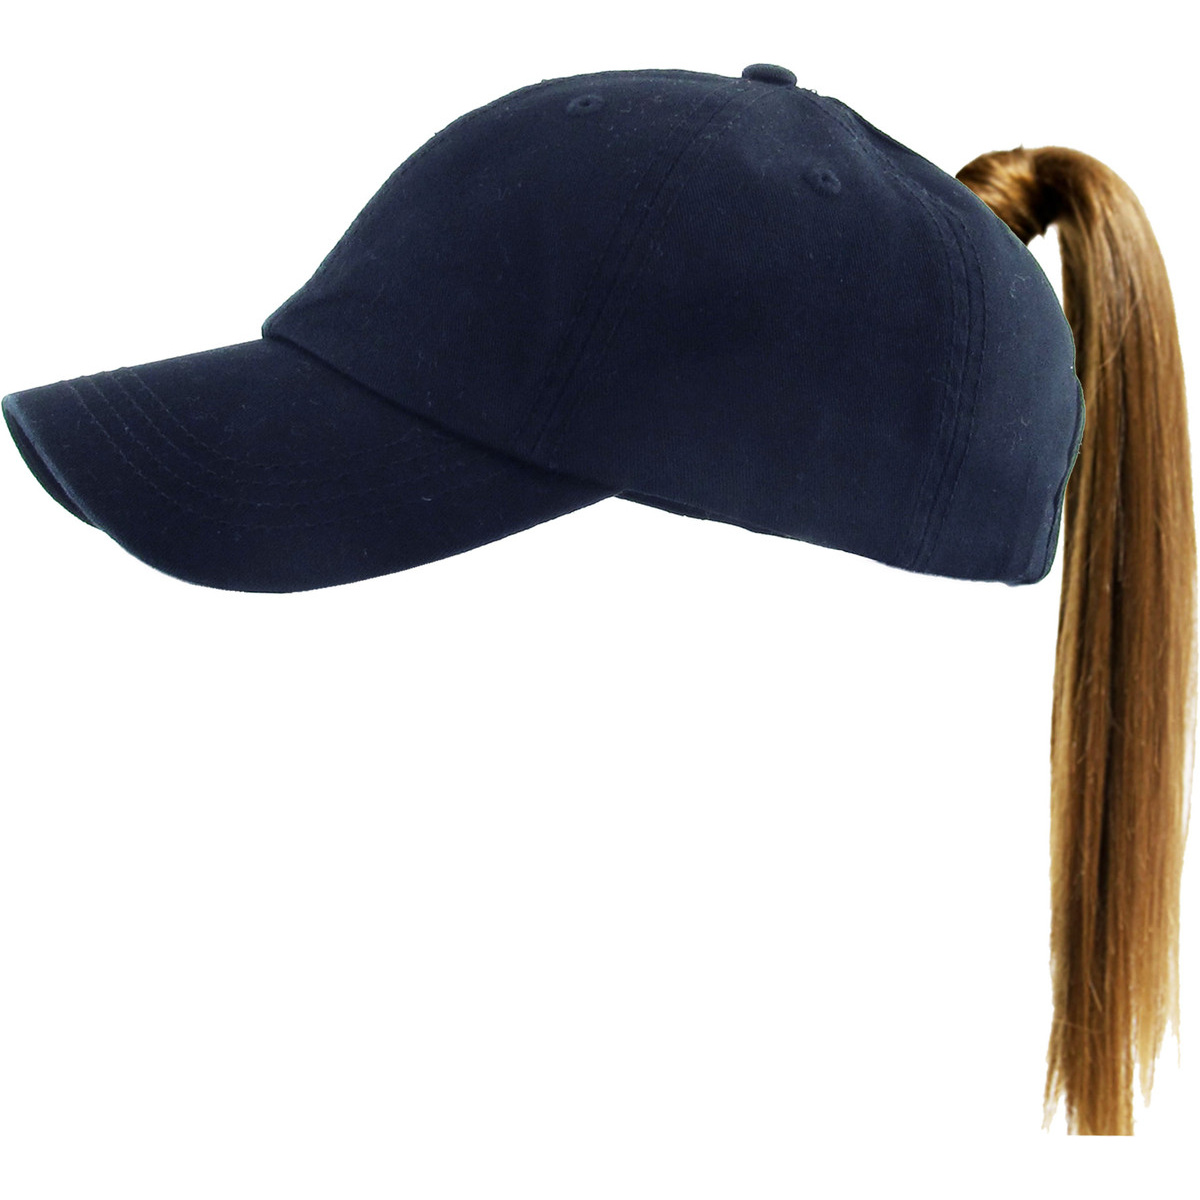 Casquette Baseball Femme Ponytail Marine - Traclet Reference : 12107